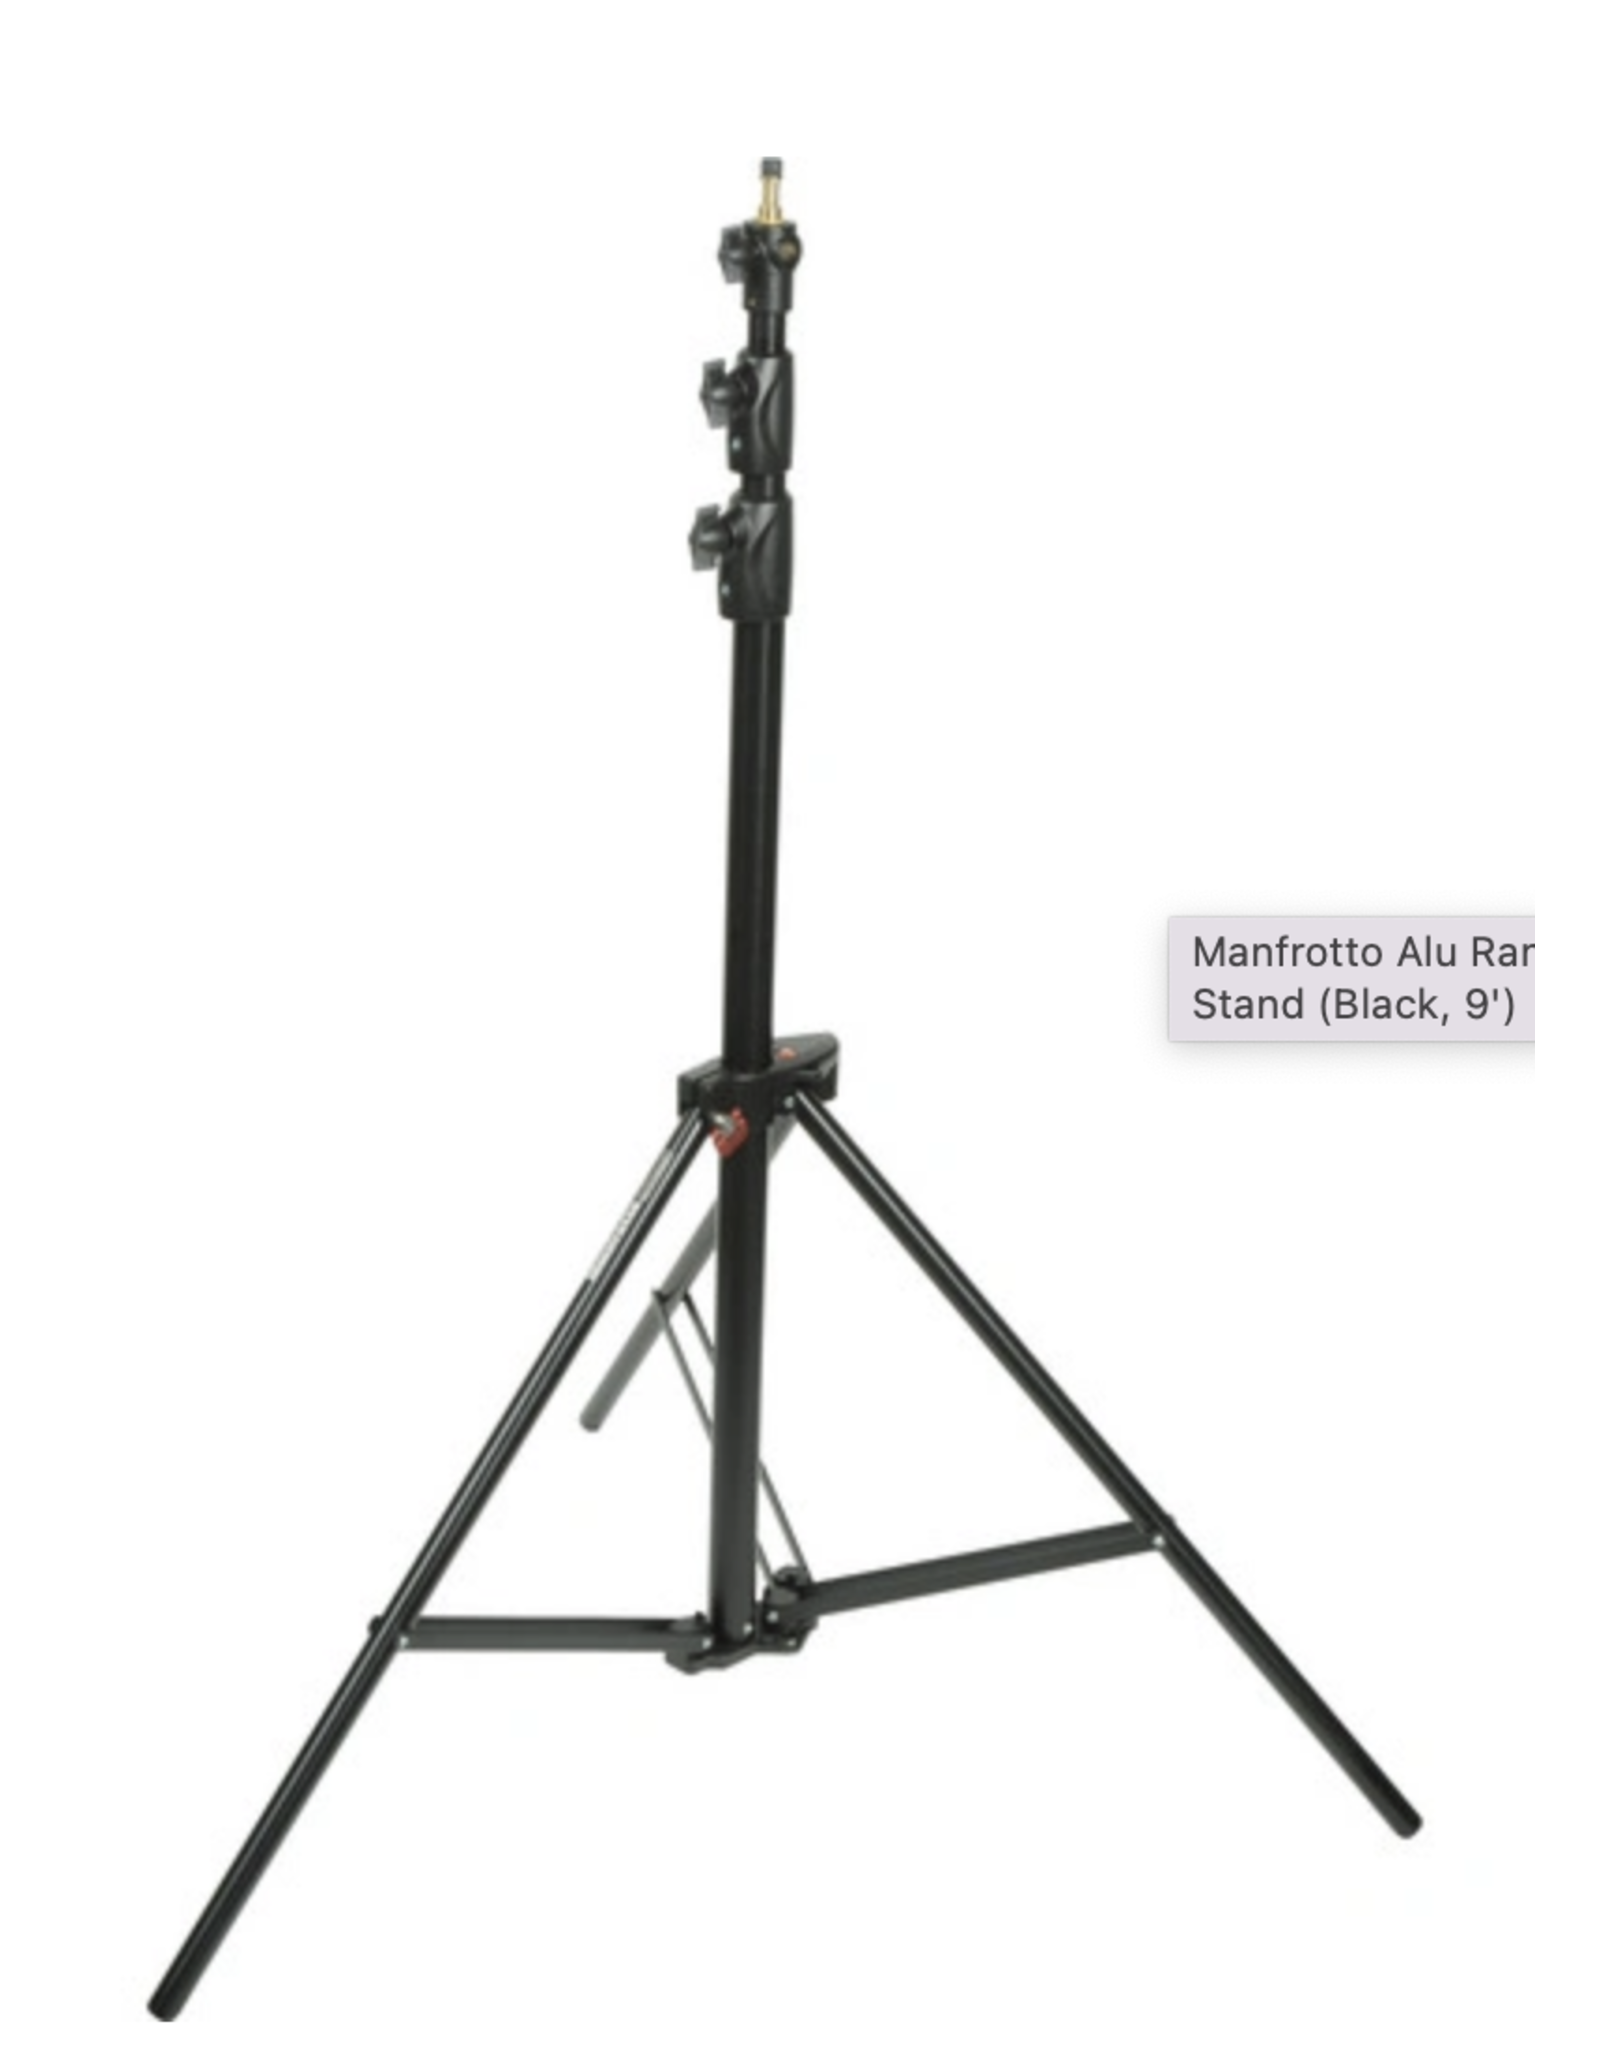 Manfrotto Manfrotto Alu Ranker Air-Cushioned Light Stand (Black, 9')